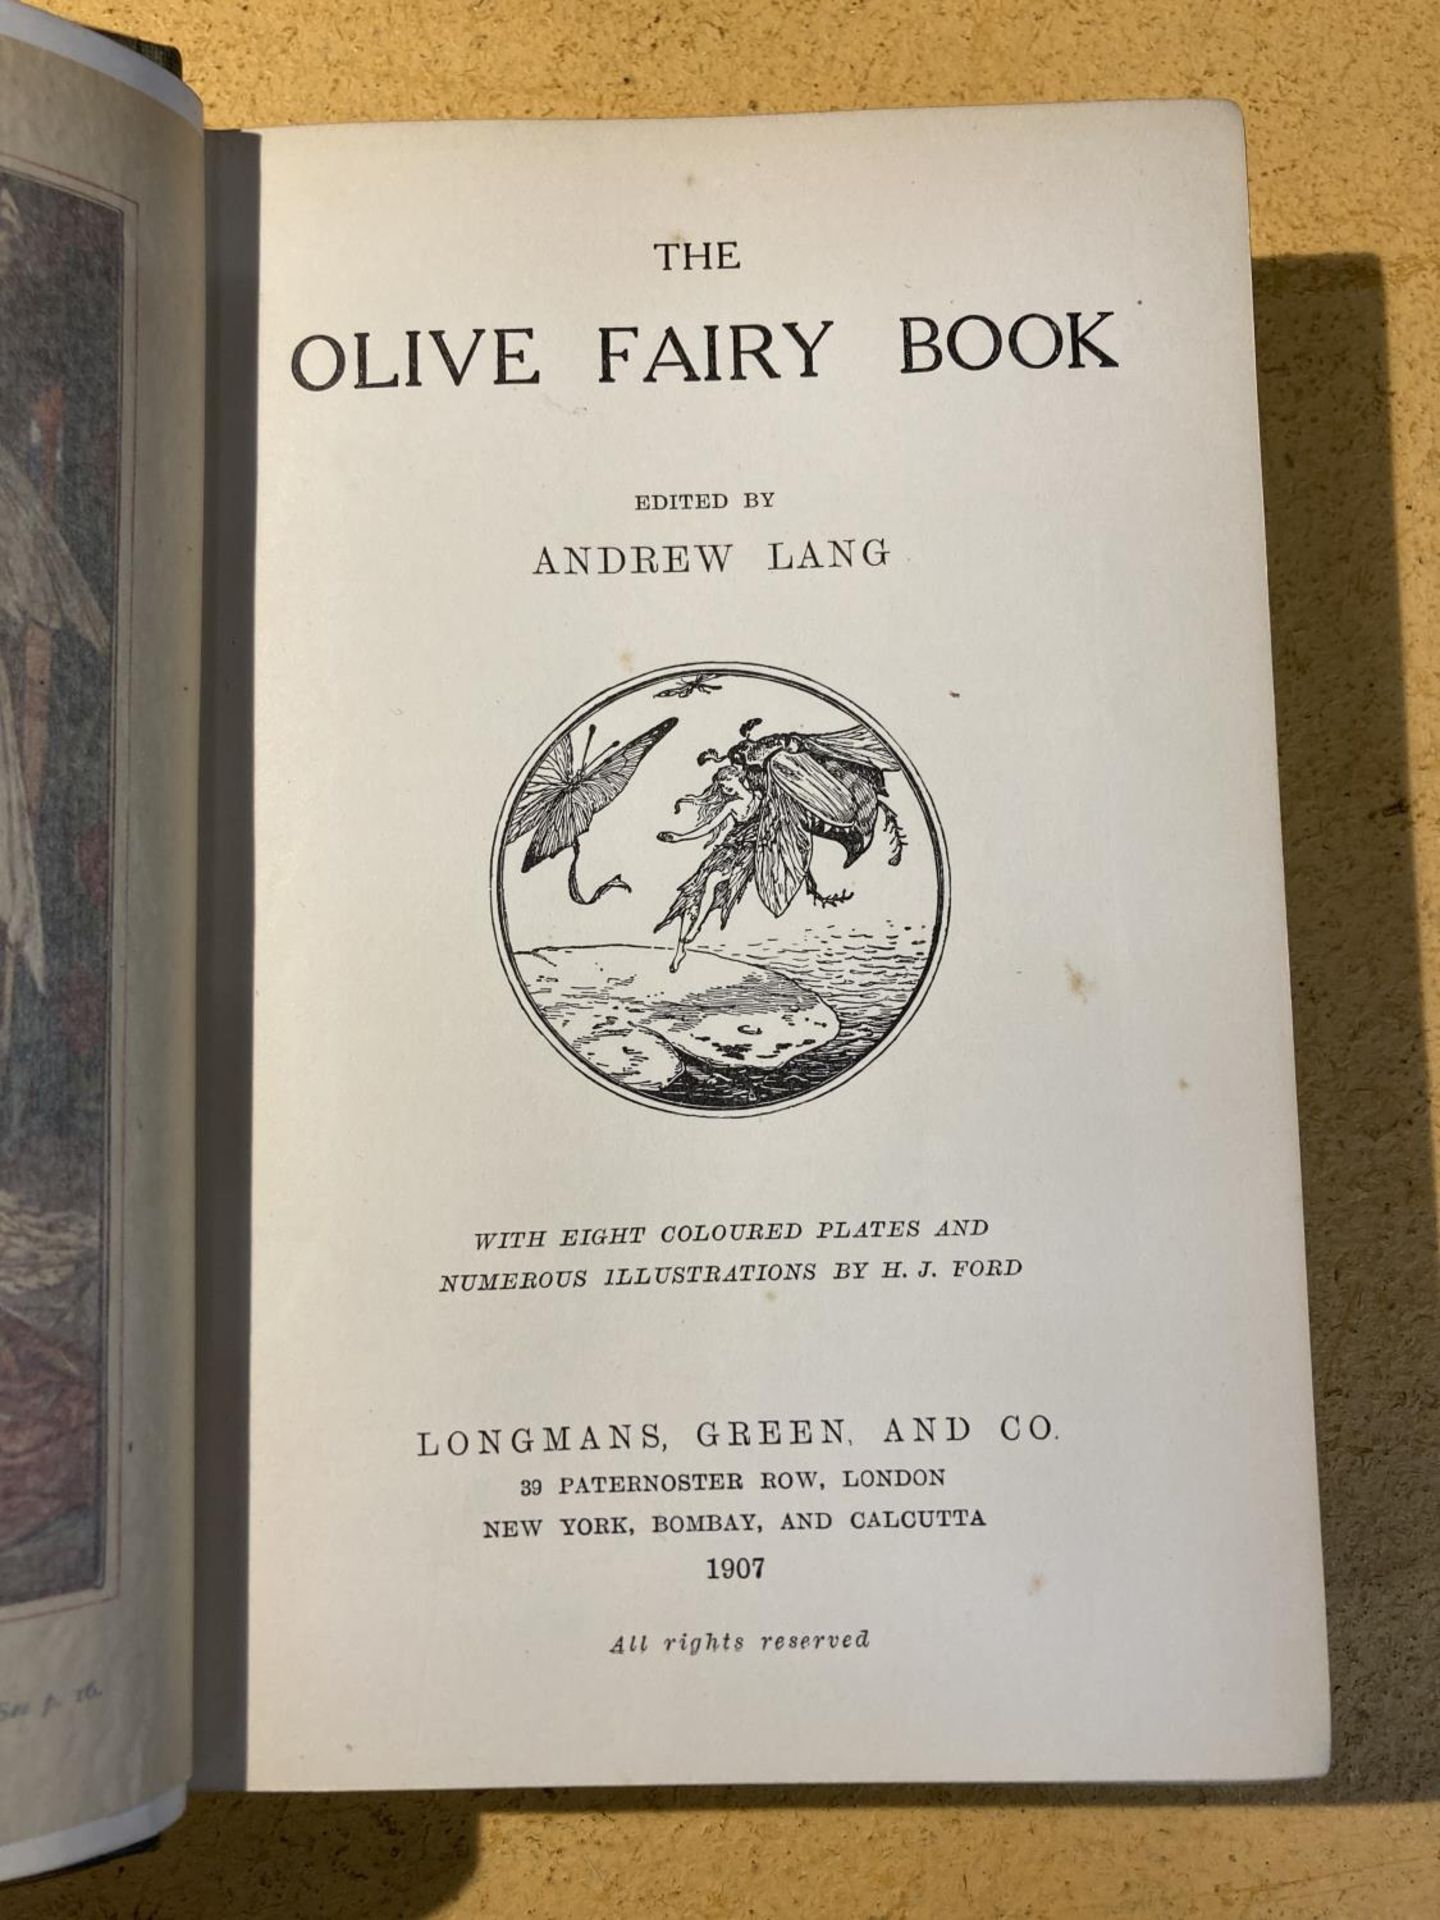 A 1907 FIRST EDITION THE OLIVE FAIRY BOOK - ANDREW LANG - PUBLISHED BY LONGMANS, GREEN AND CO, - Image 3 of 3